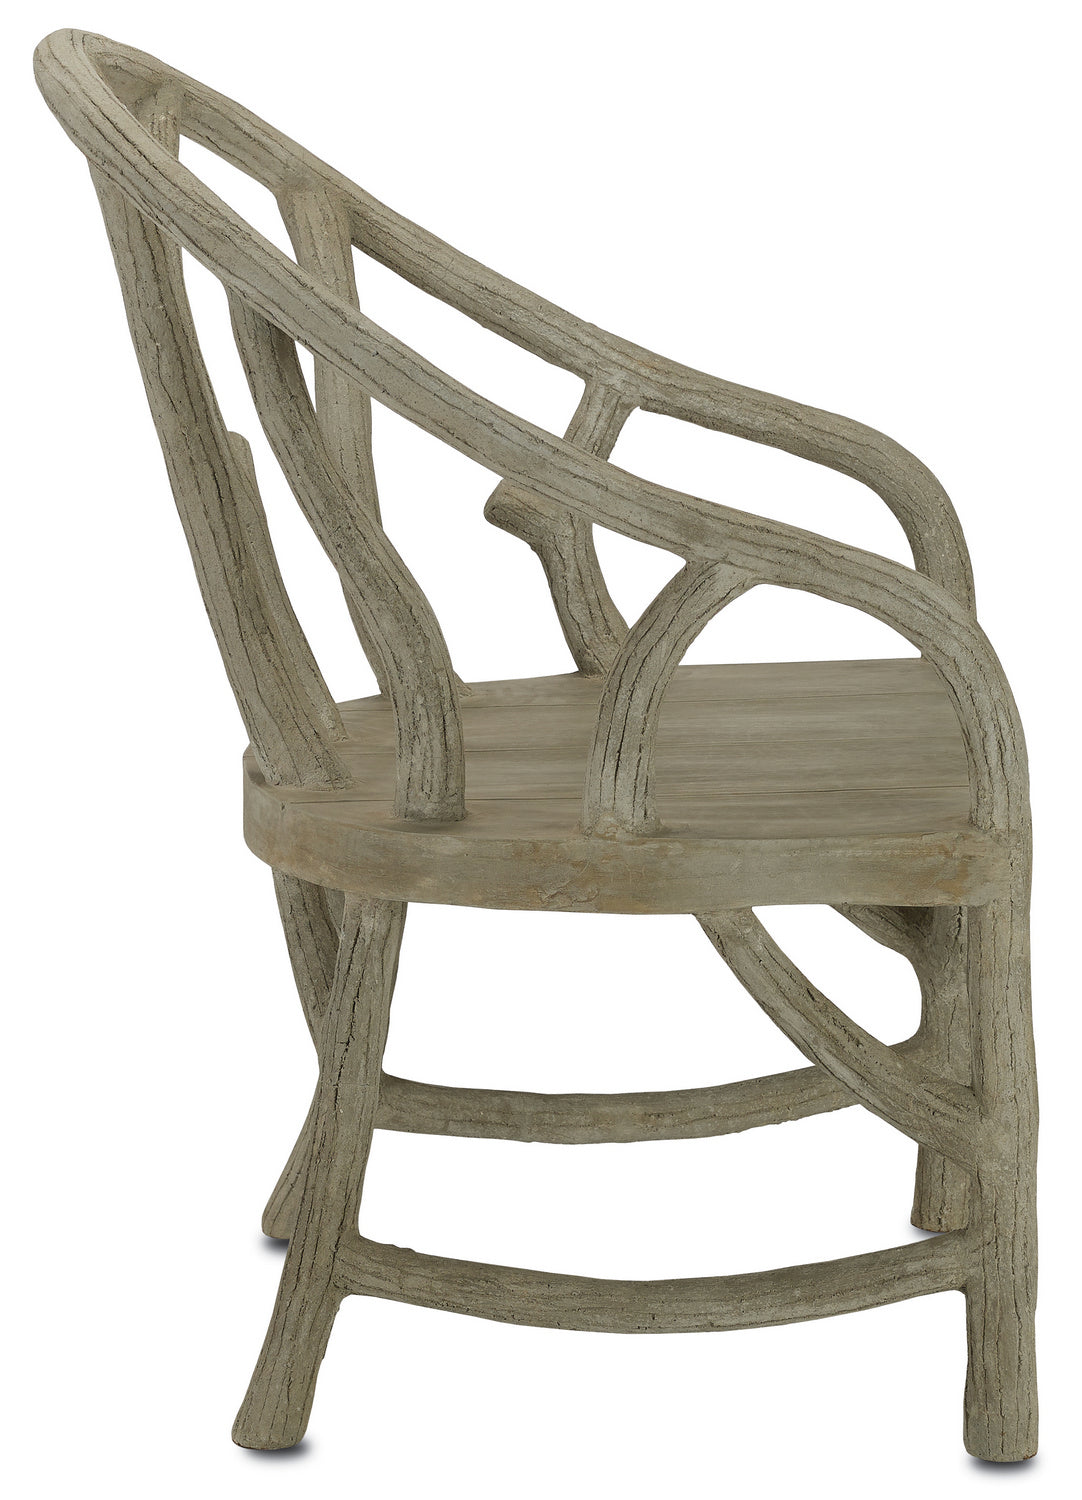 Chair from the Arbor collection in Portland/Faux Bois finish